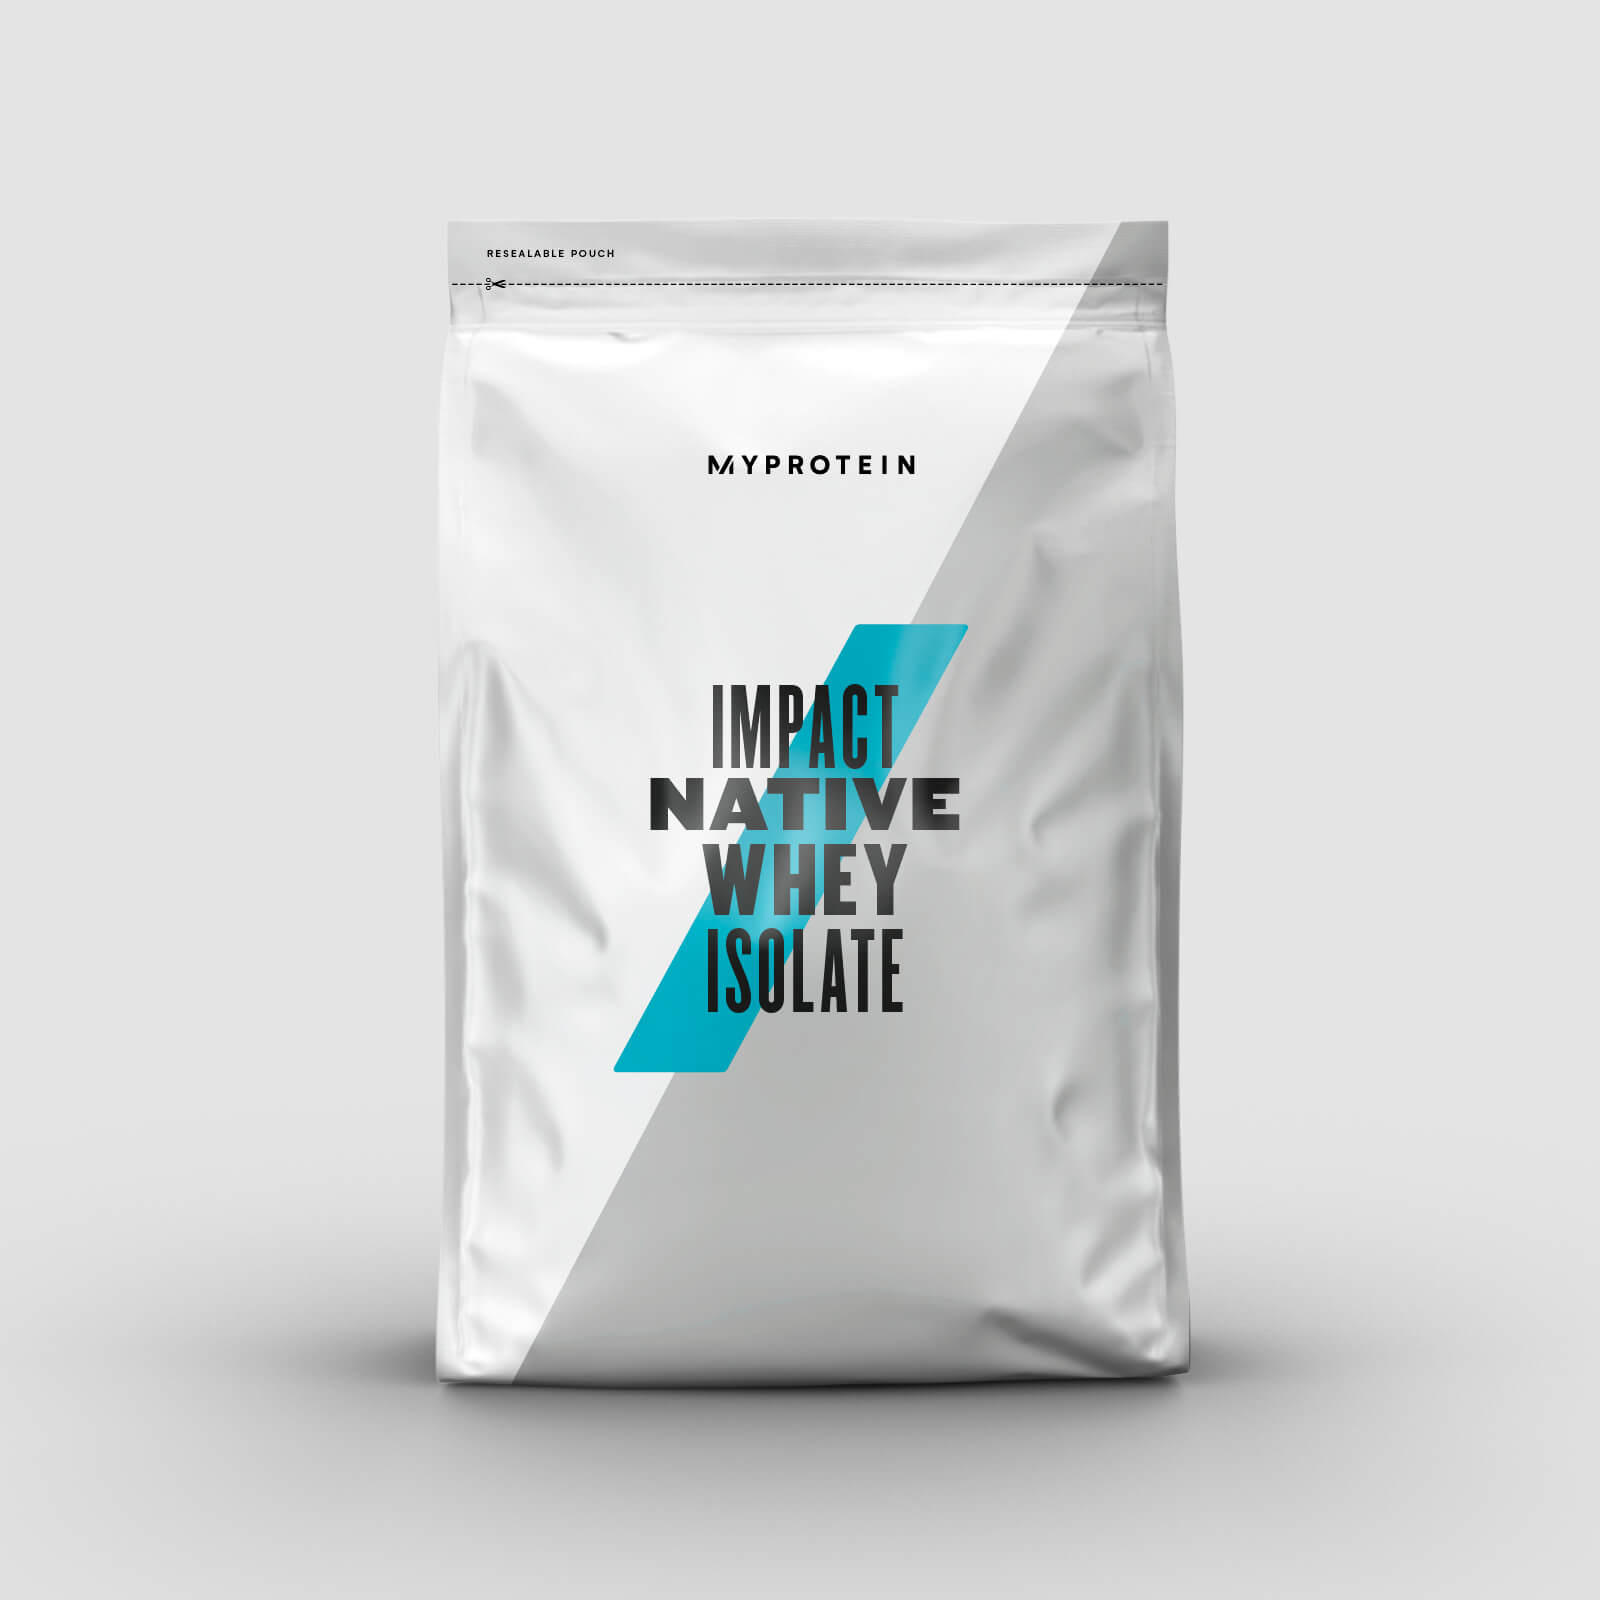 Myprotein Impact Native Whey Isolate - 2.5kg - New - Natural Strawberry